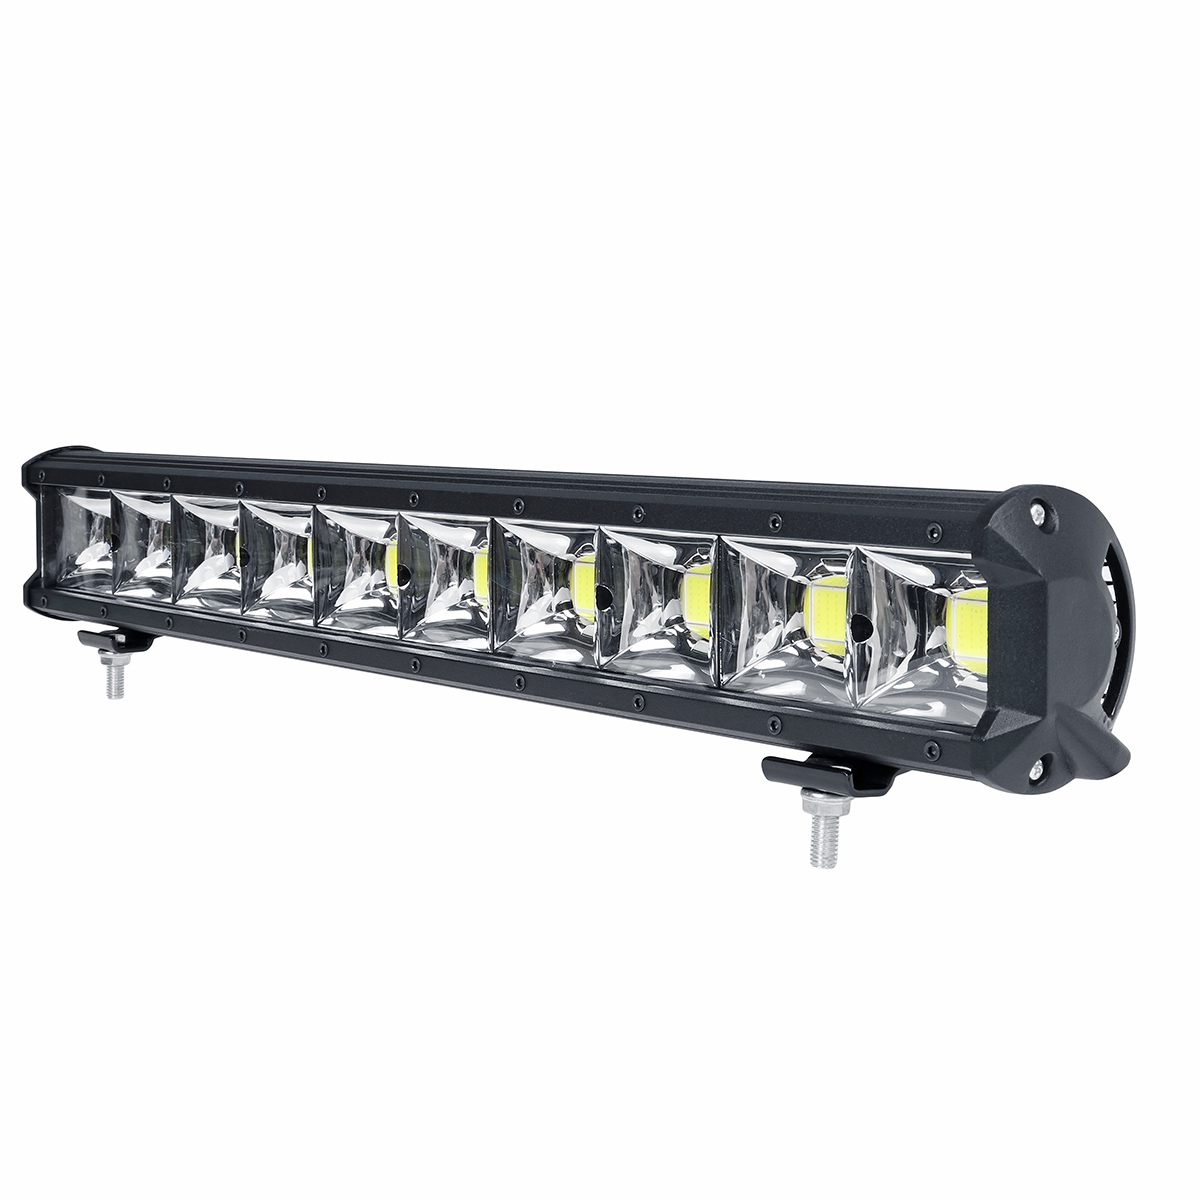 5 Inch 9 Inch 13 Inch 22 Inch COB LED Work Light Bar Waterproof 6000K Universal for Car Home